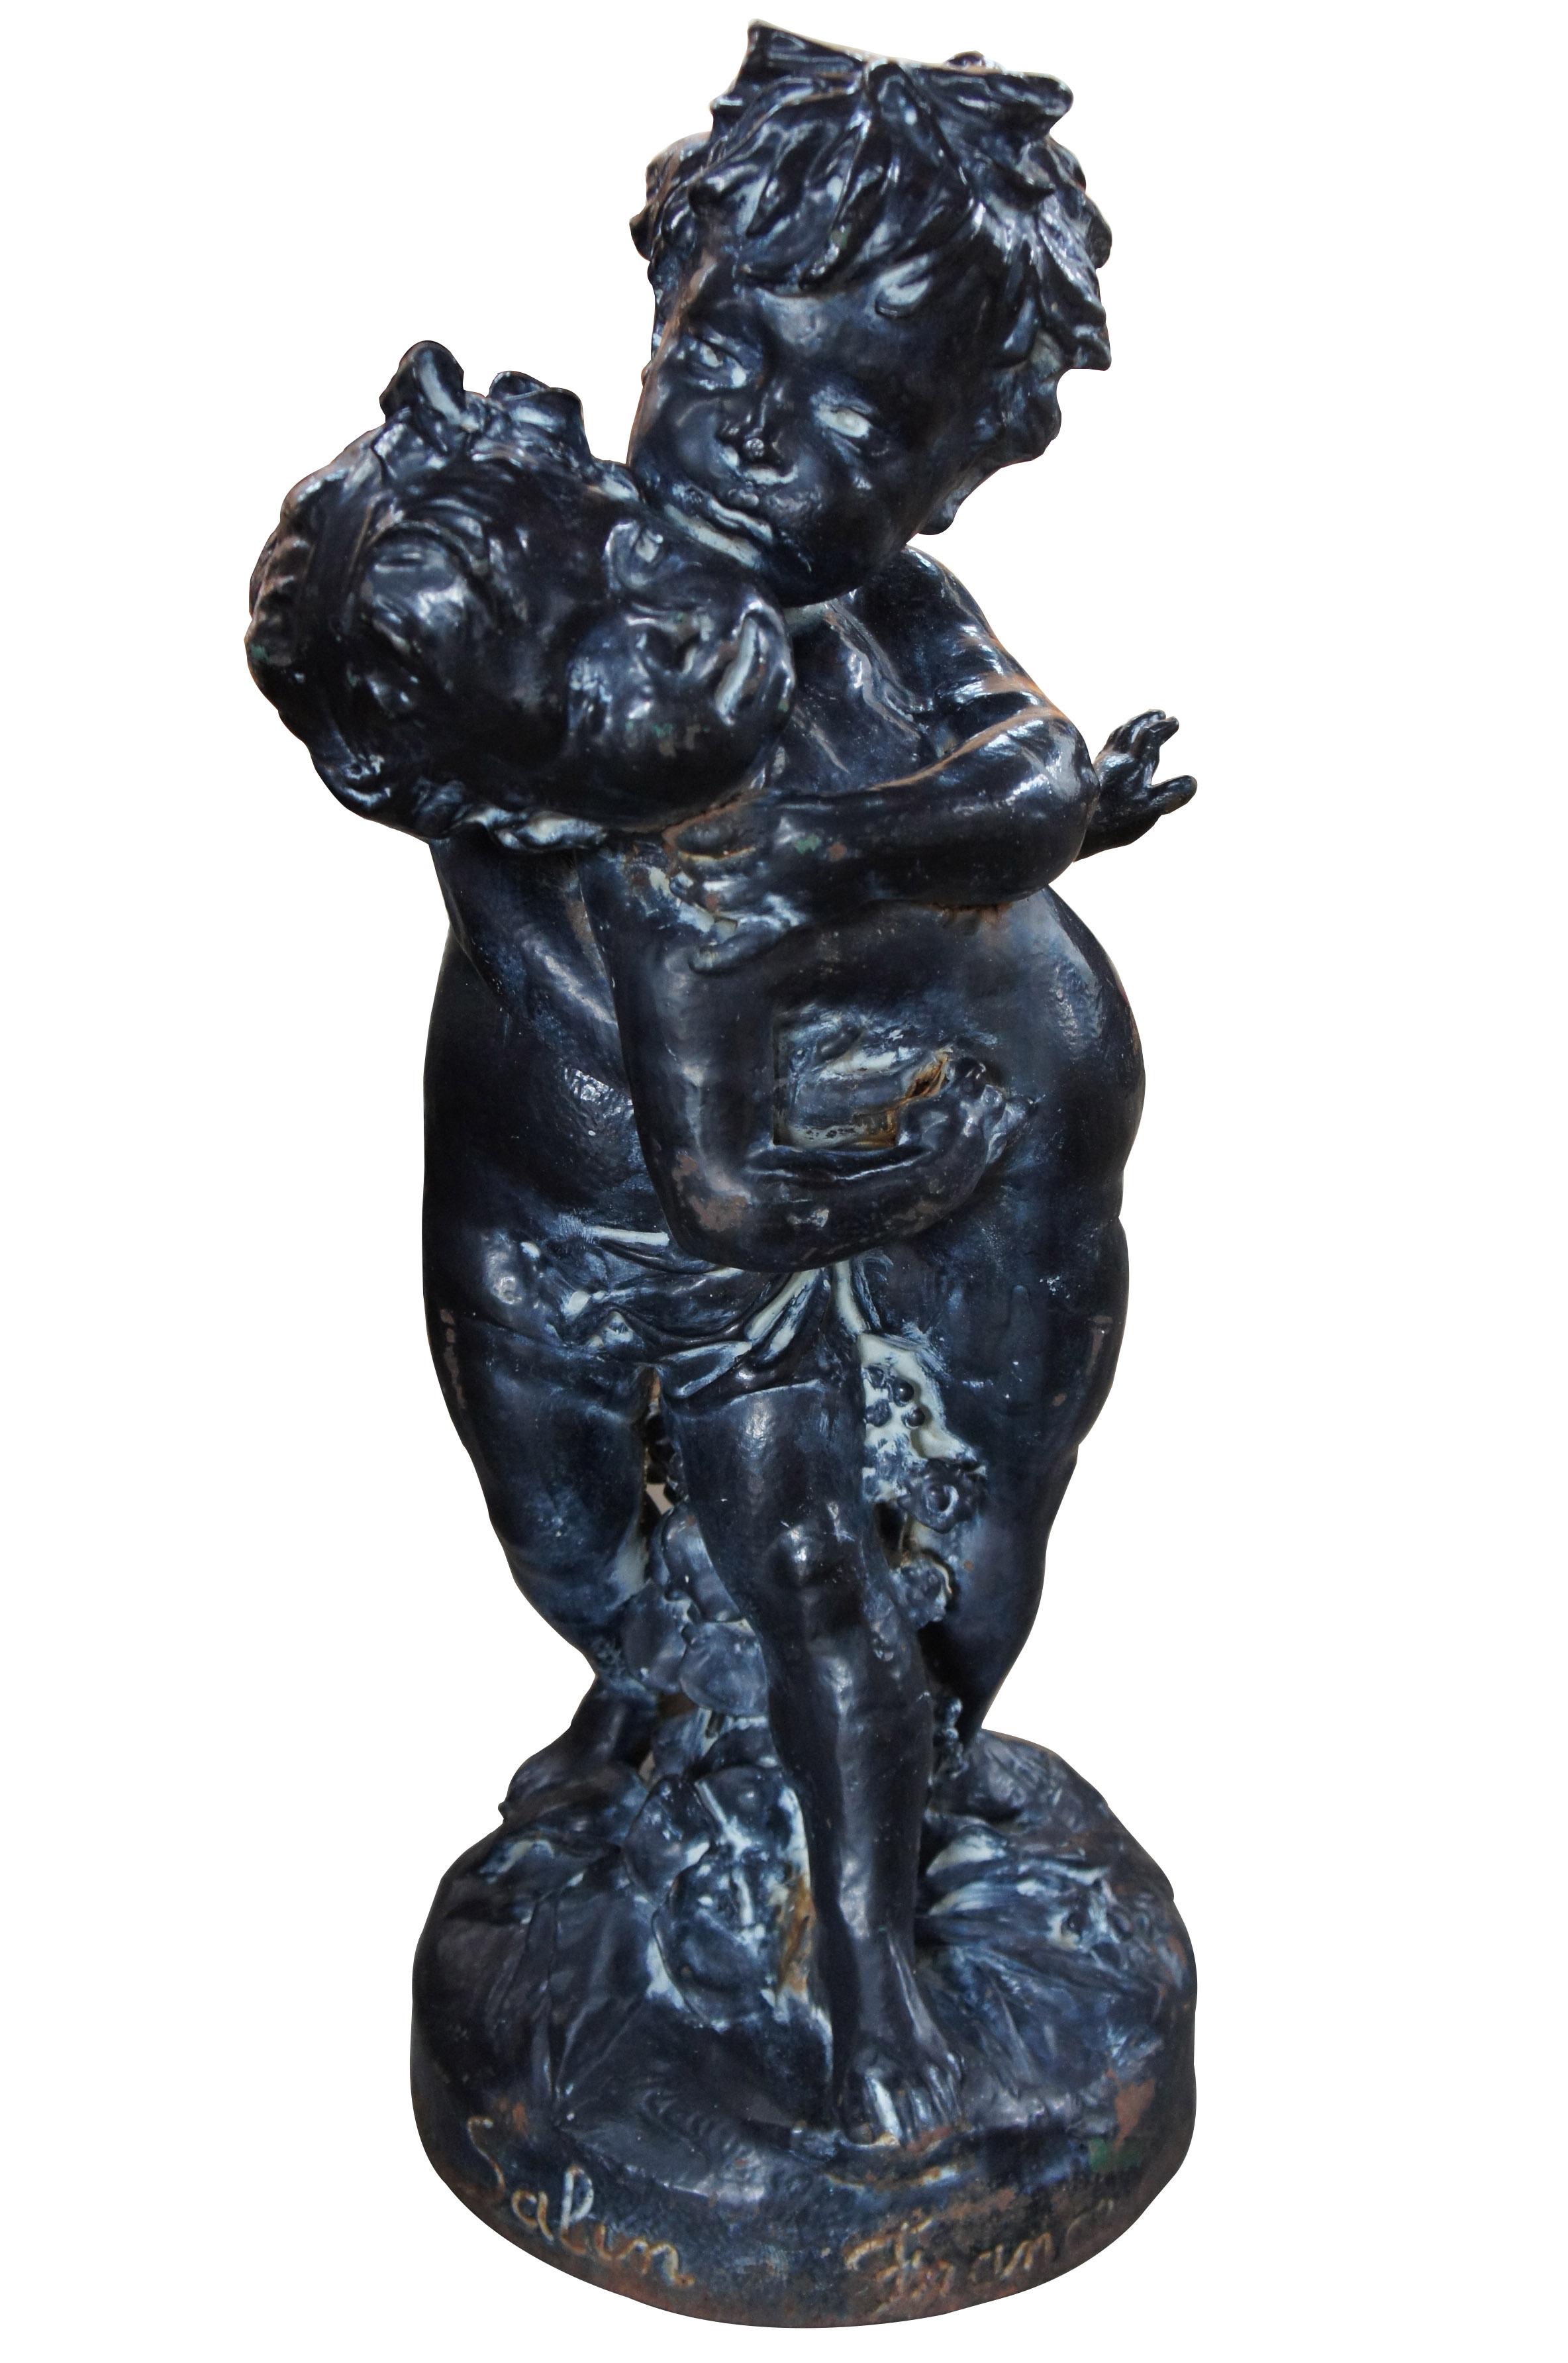 19th century salin foundry French neoclassical cast iron sculpture statue, France

Features two boys playing
Front of plinth inscribed Salin, France
Salin Foundry, Dammarie-sur-Saulx.